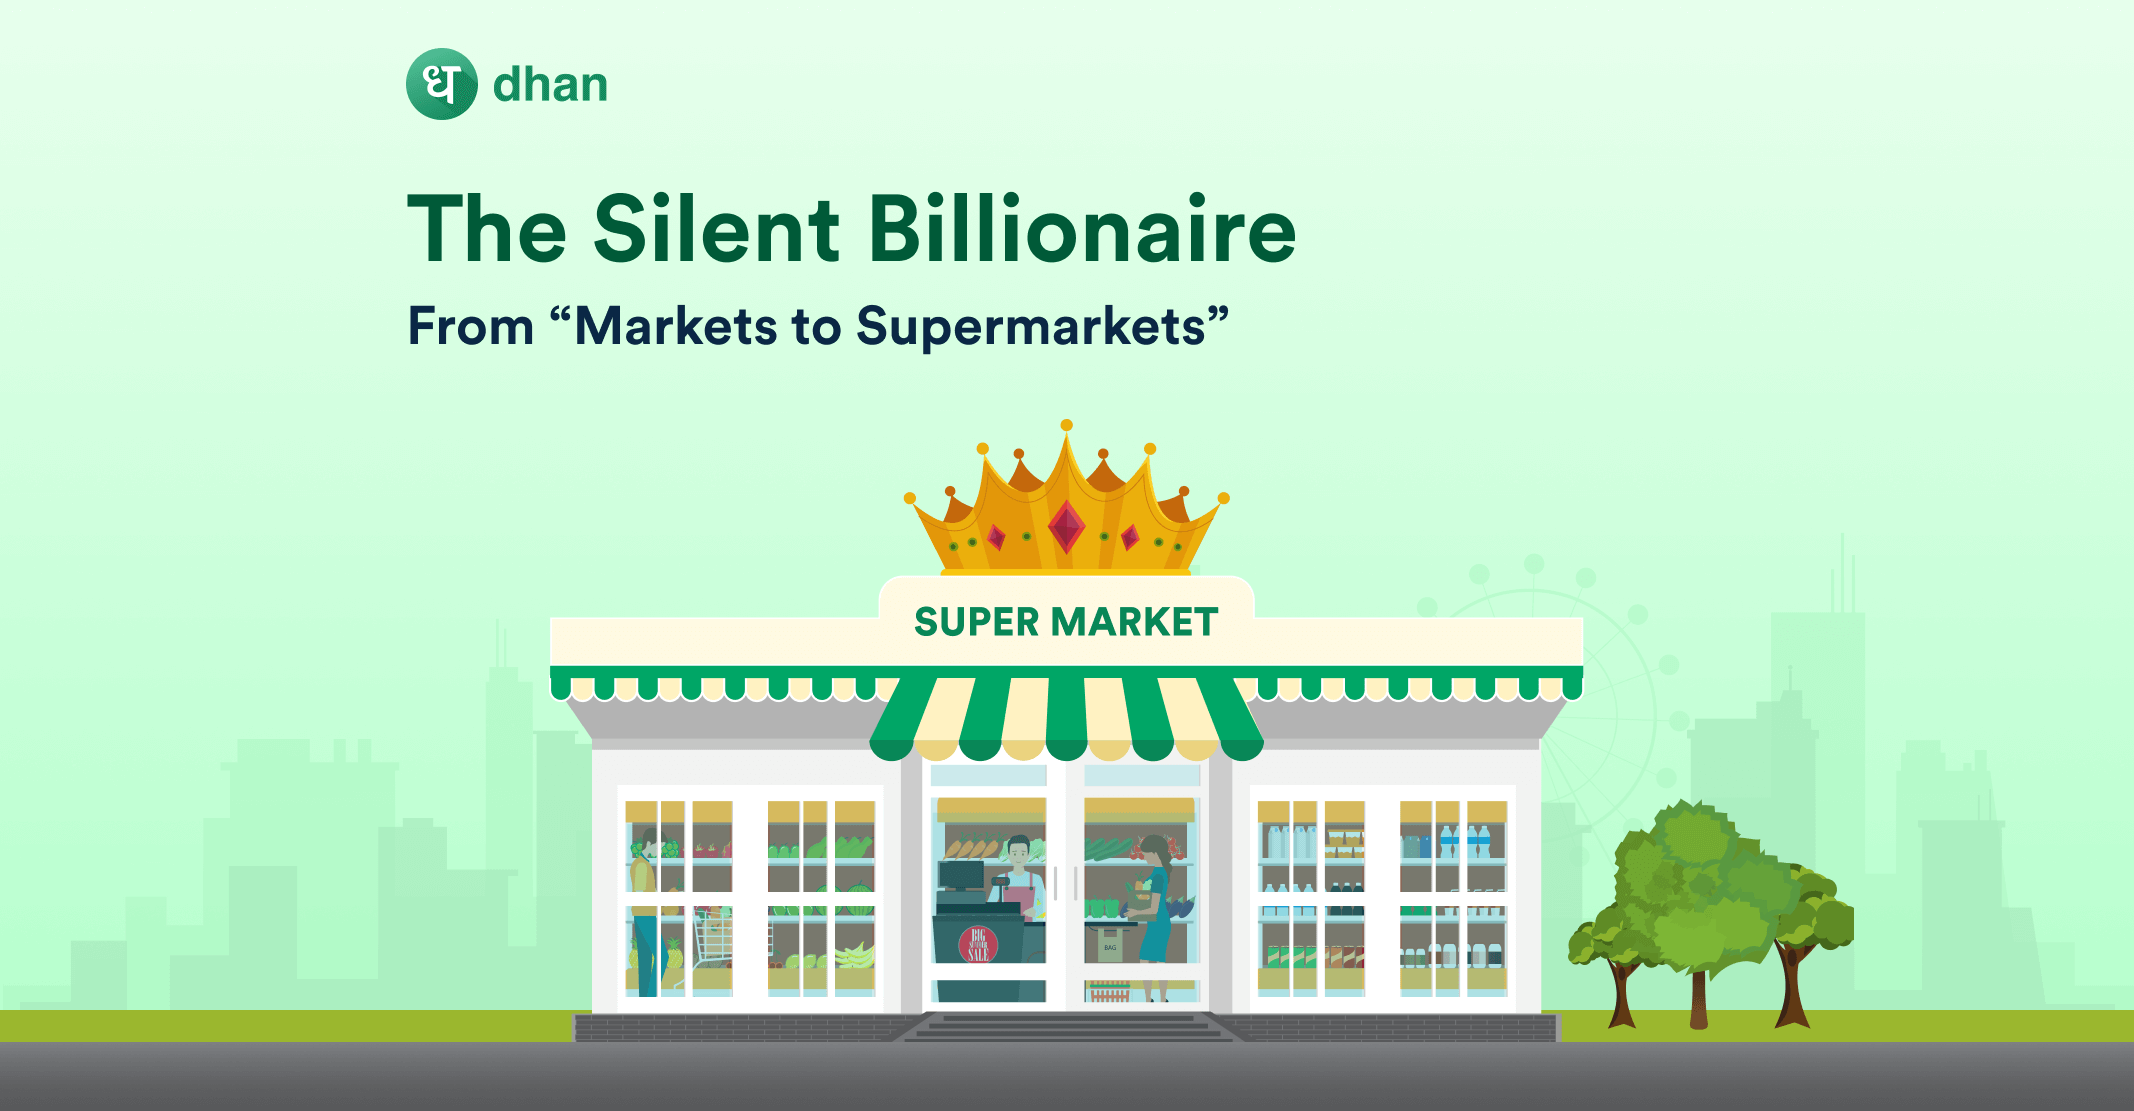 The Silent Billionaire - From “Markets to Supermarkets”